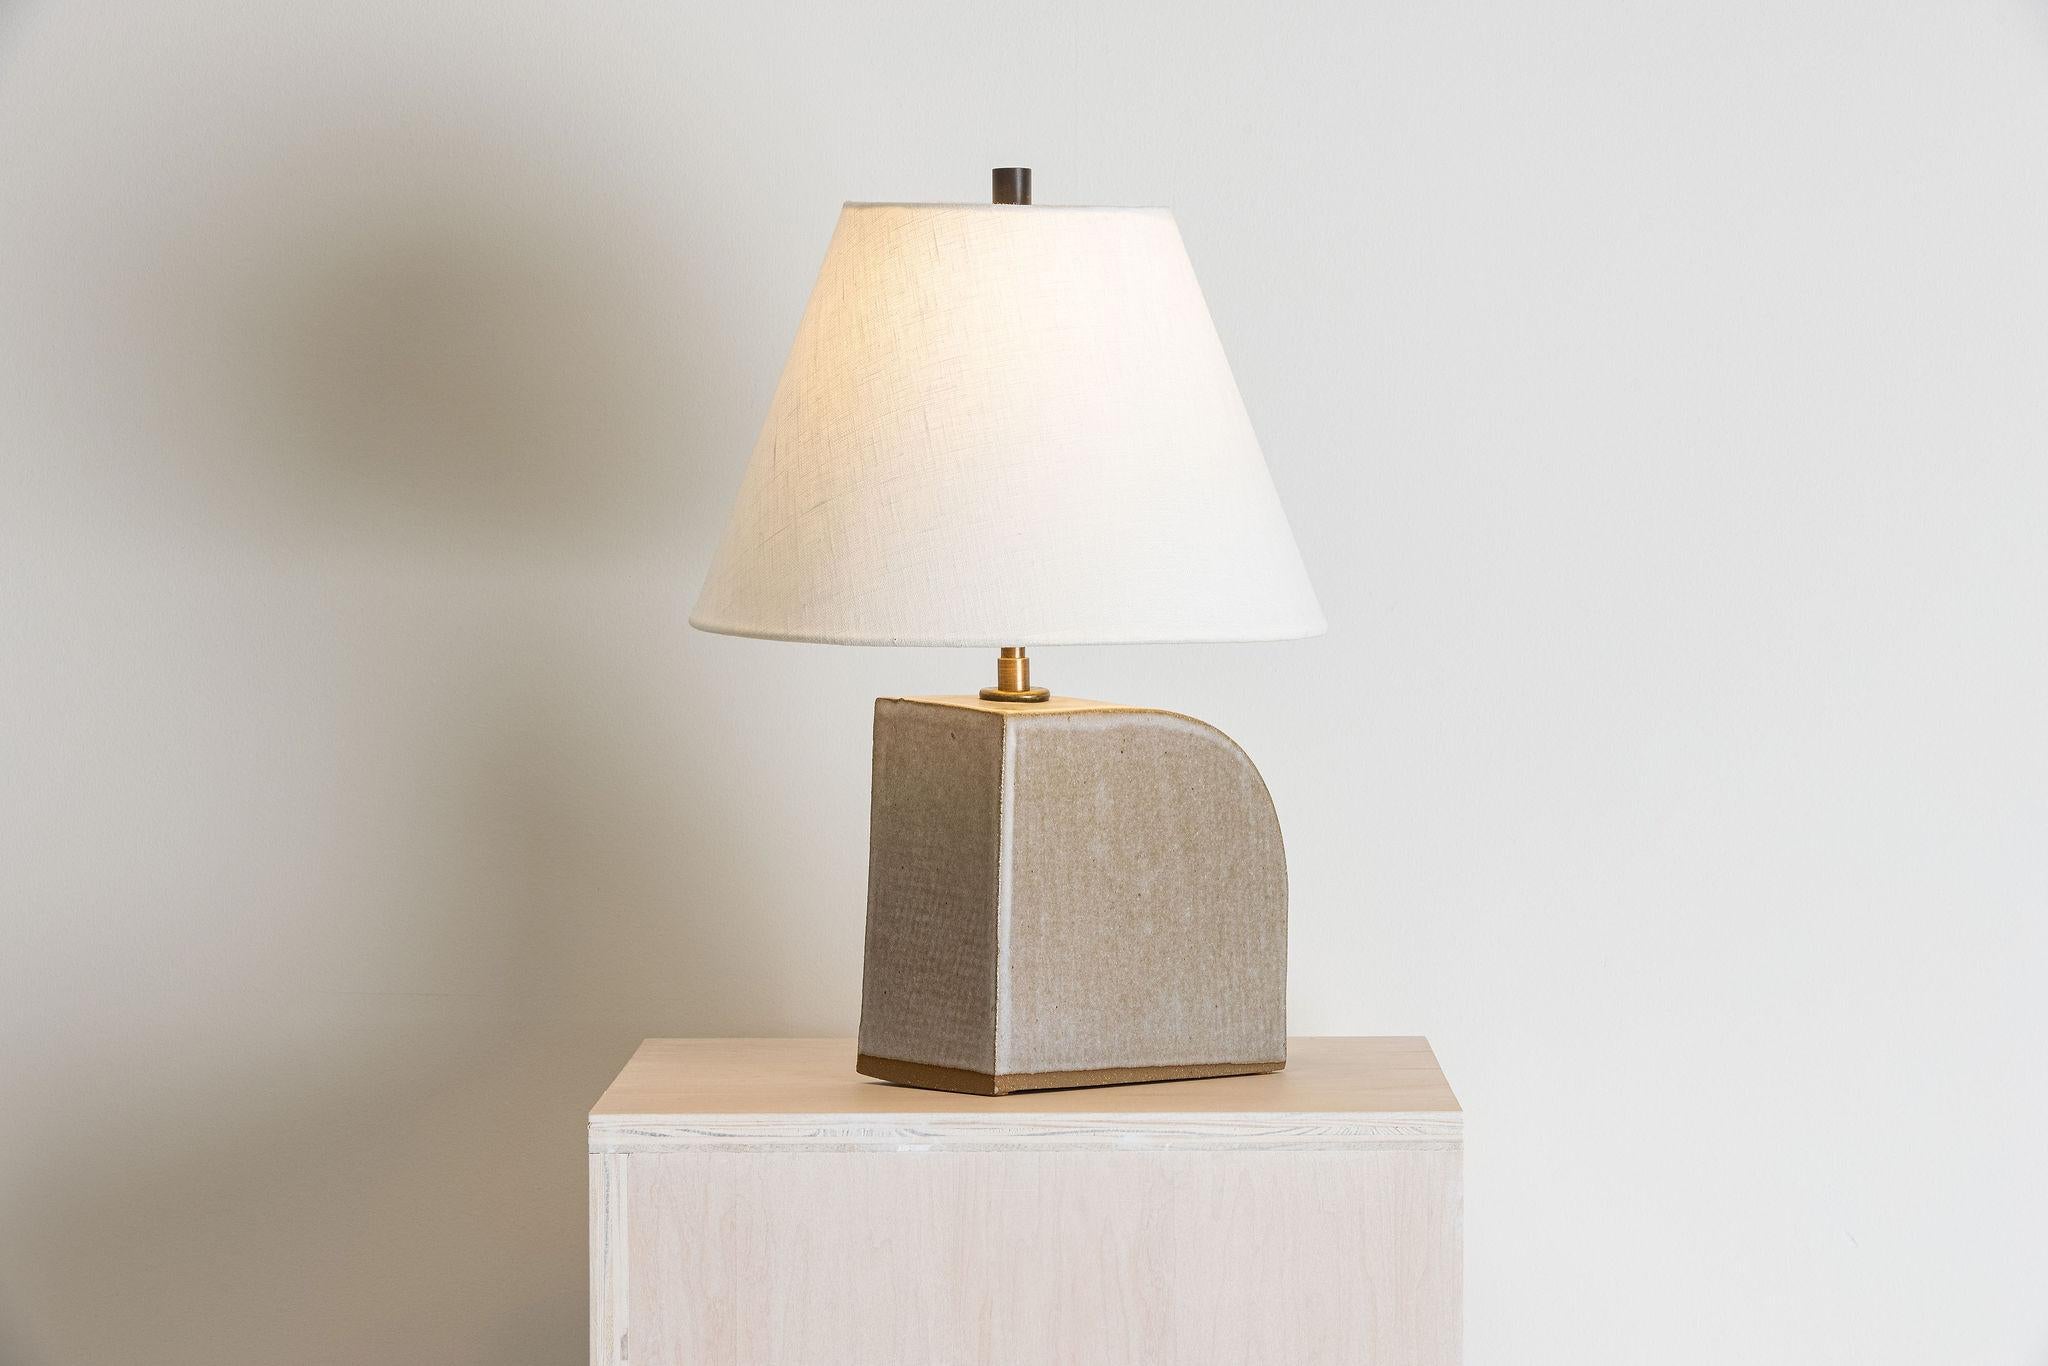 Our stoneware Gumbo Lamp is handcrafted using slab-construction techniques.

Finish

- Dipped glaze, pictured in parchment
- Antique brass fittings
- Twisted black-cloth cord
- Full-range dimmer socket
- Ochre burlap or black-linen